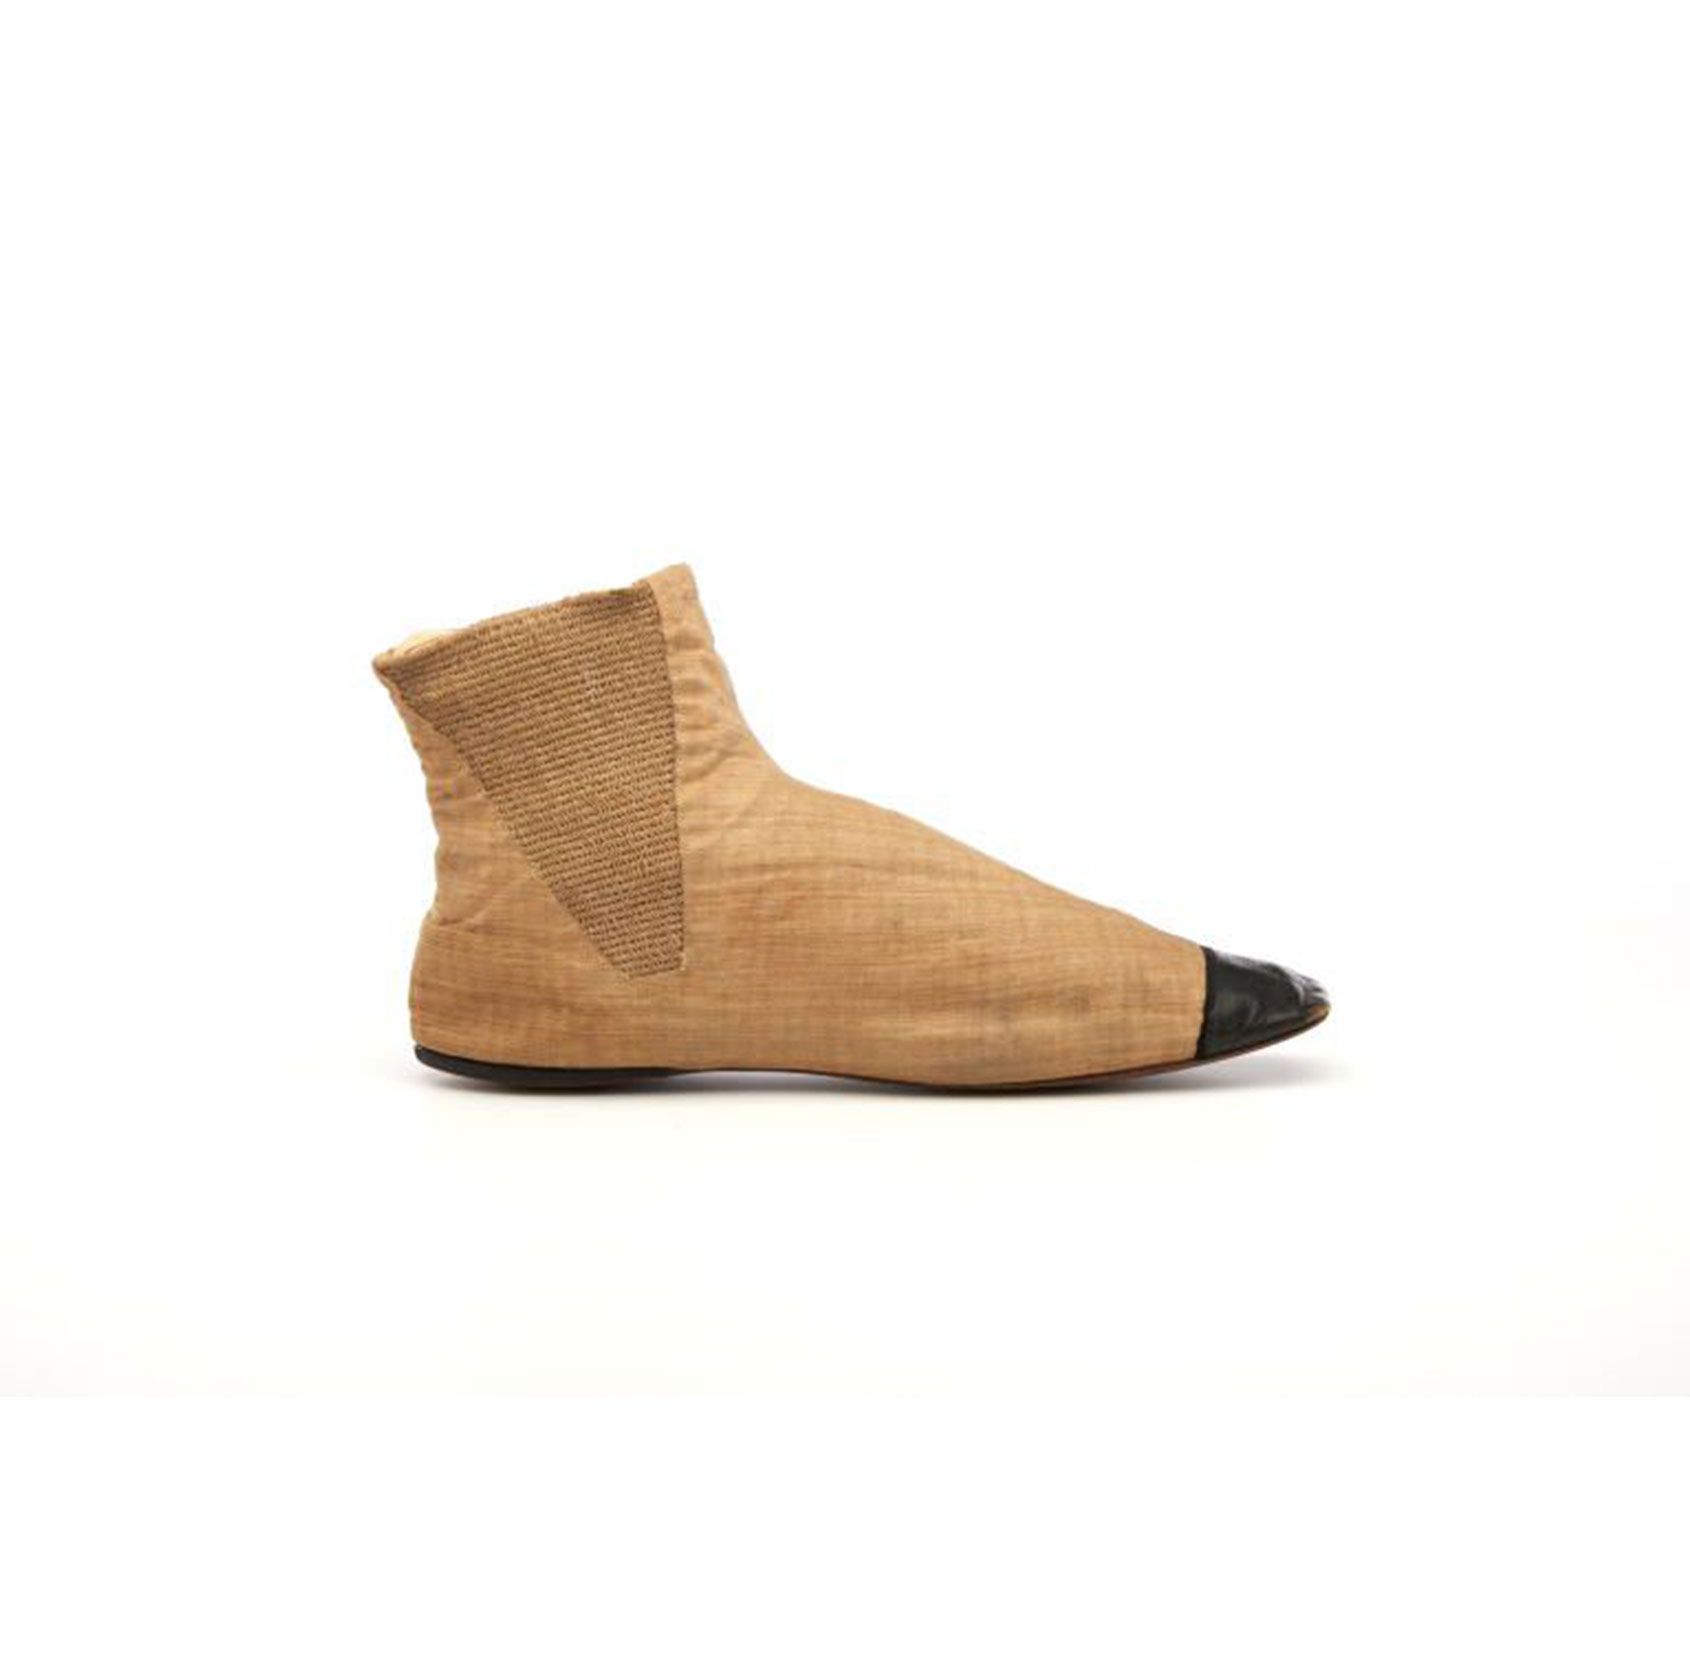 Teym - Blog - History of The Chelsea Boot - Collection Maas Museum - photo textblock - 1